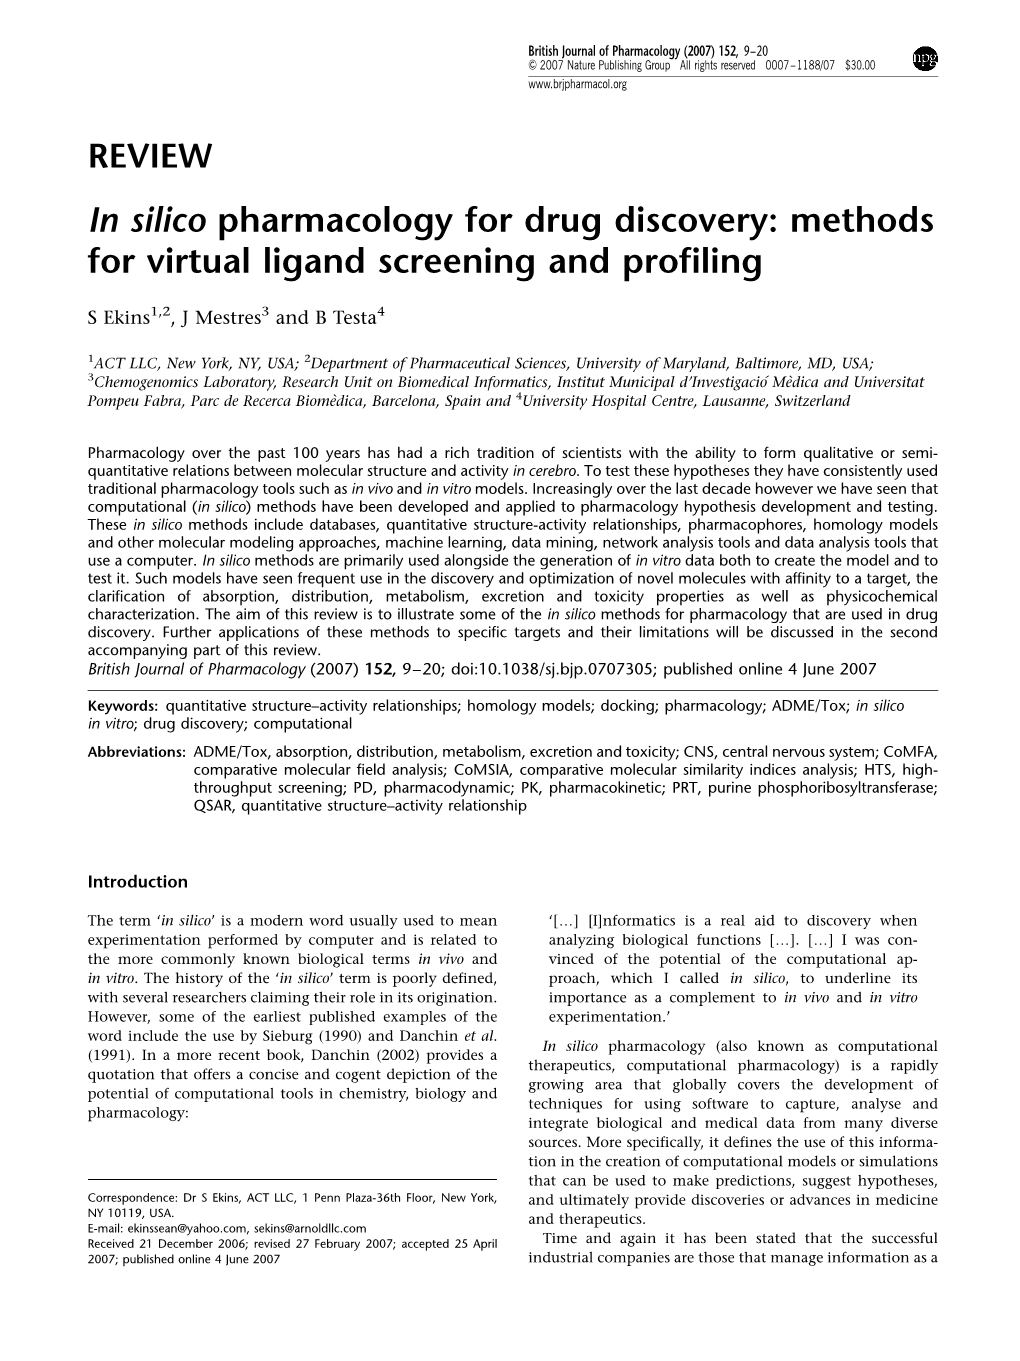 In Silico Pharmacology for Drug Discovery: Methods for Virtual Ligand Screening and Profiling